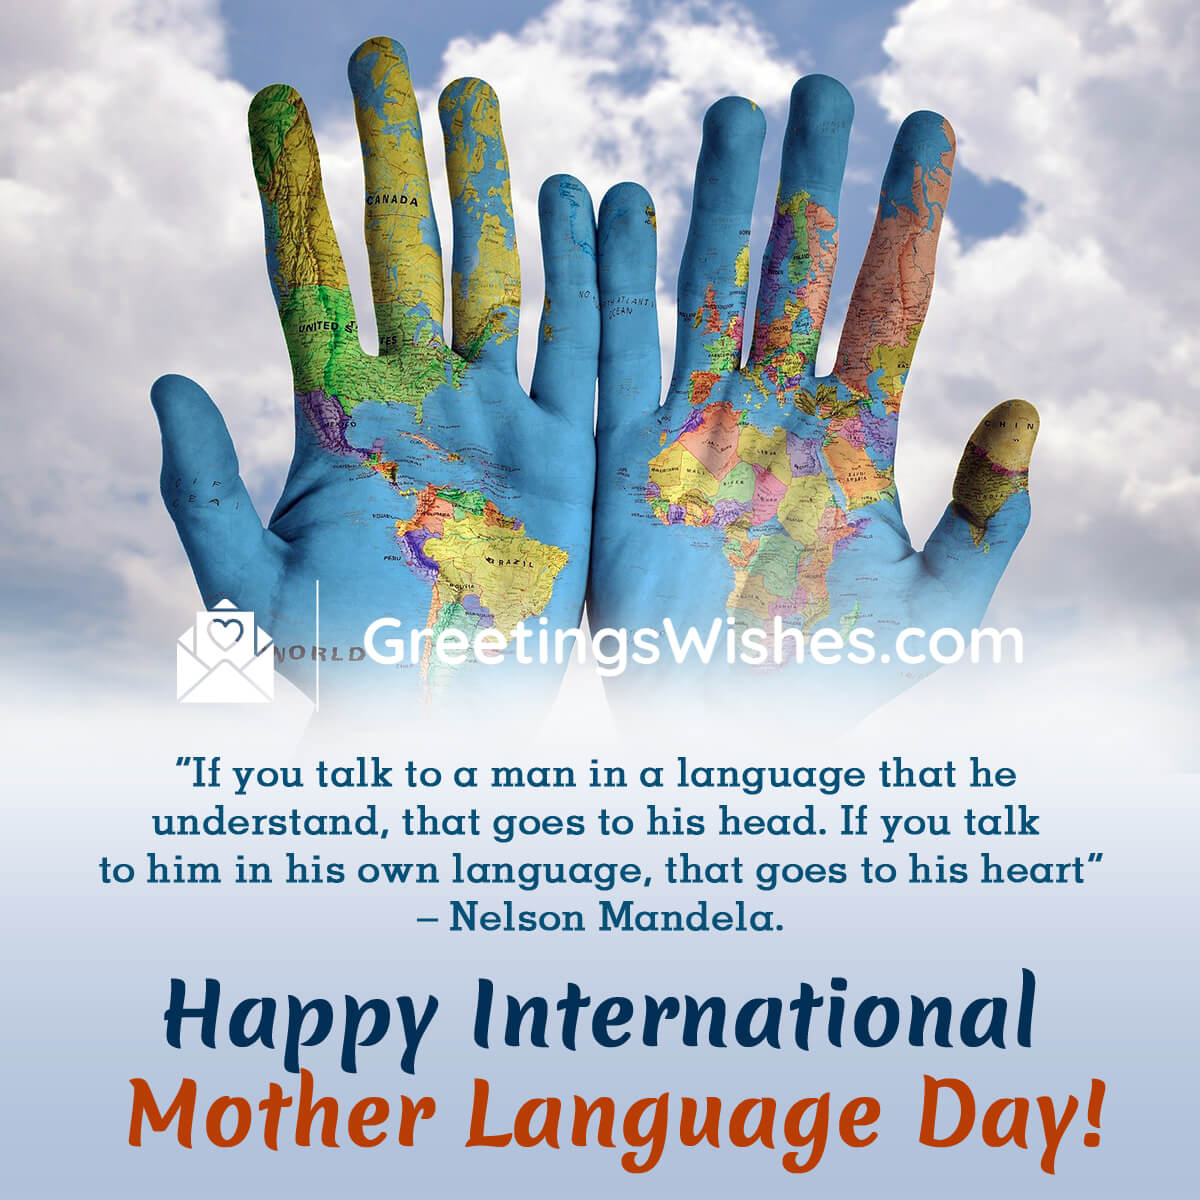 Mother Language Day Greetings